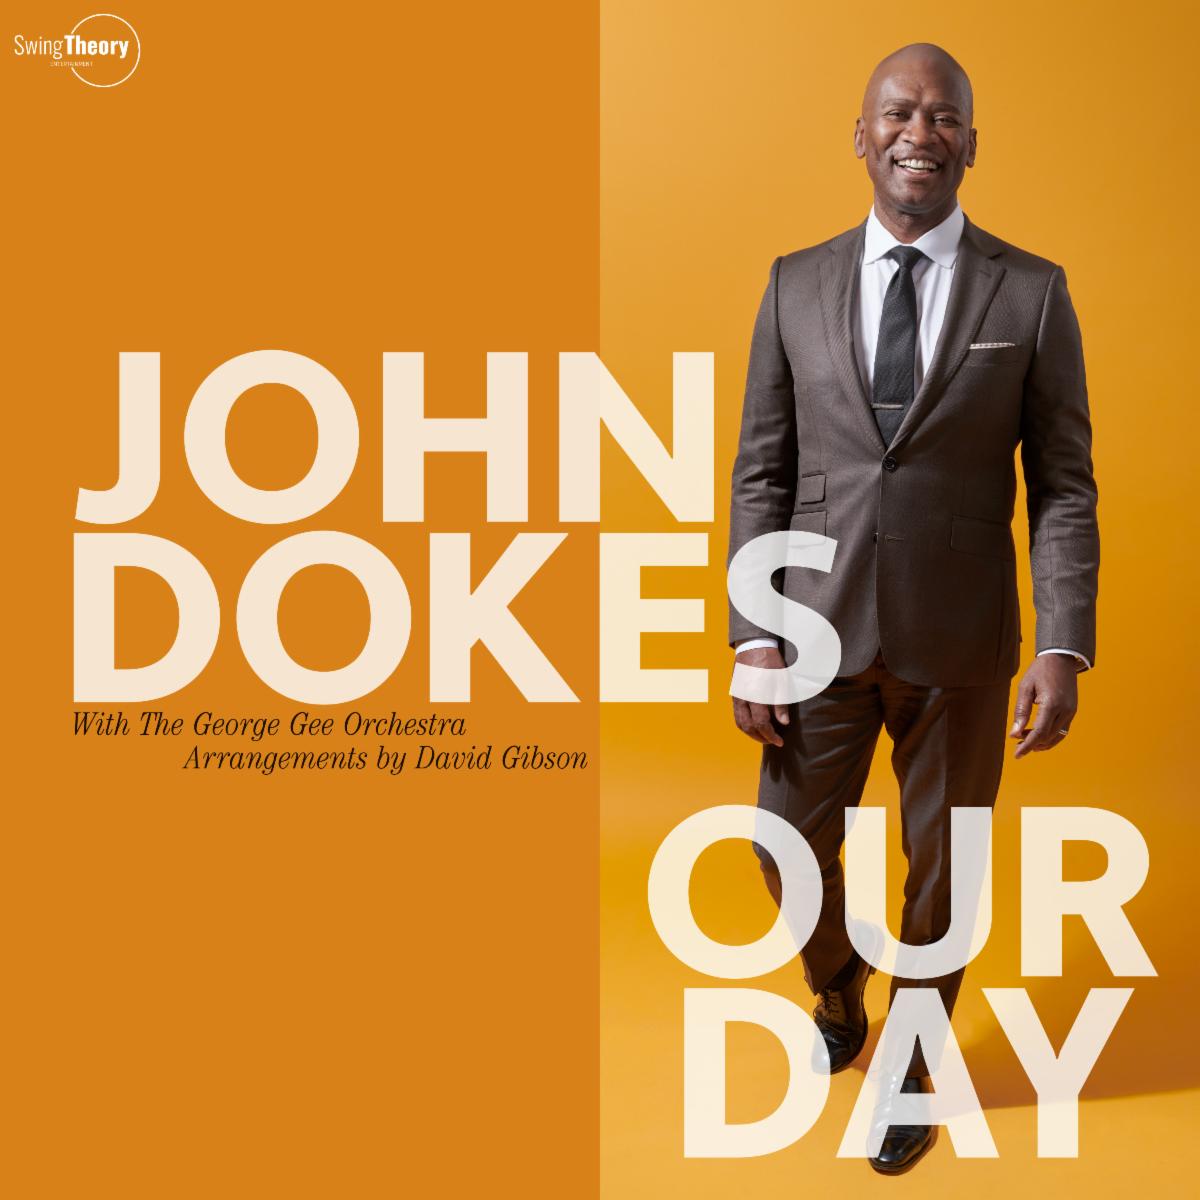 our 10th #BigBand album release featuring singer #JohnDokes plus the arrangements of @dslide13 #DavidGibson, available at johndokes.bandcamp.com/album/our-day #Jazz #JazzSinger #GeorgeGee #JazzVocal #JazzVocals #SwingMakesYouHappy #JazzMusician #JazzMusicians